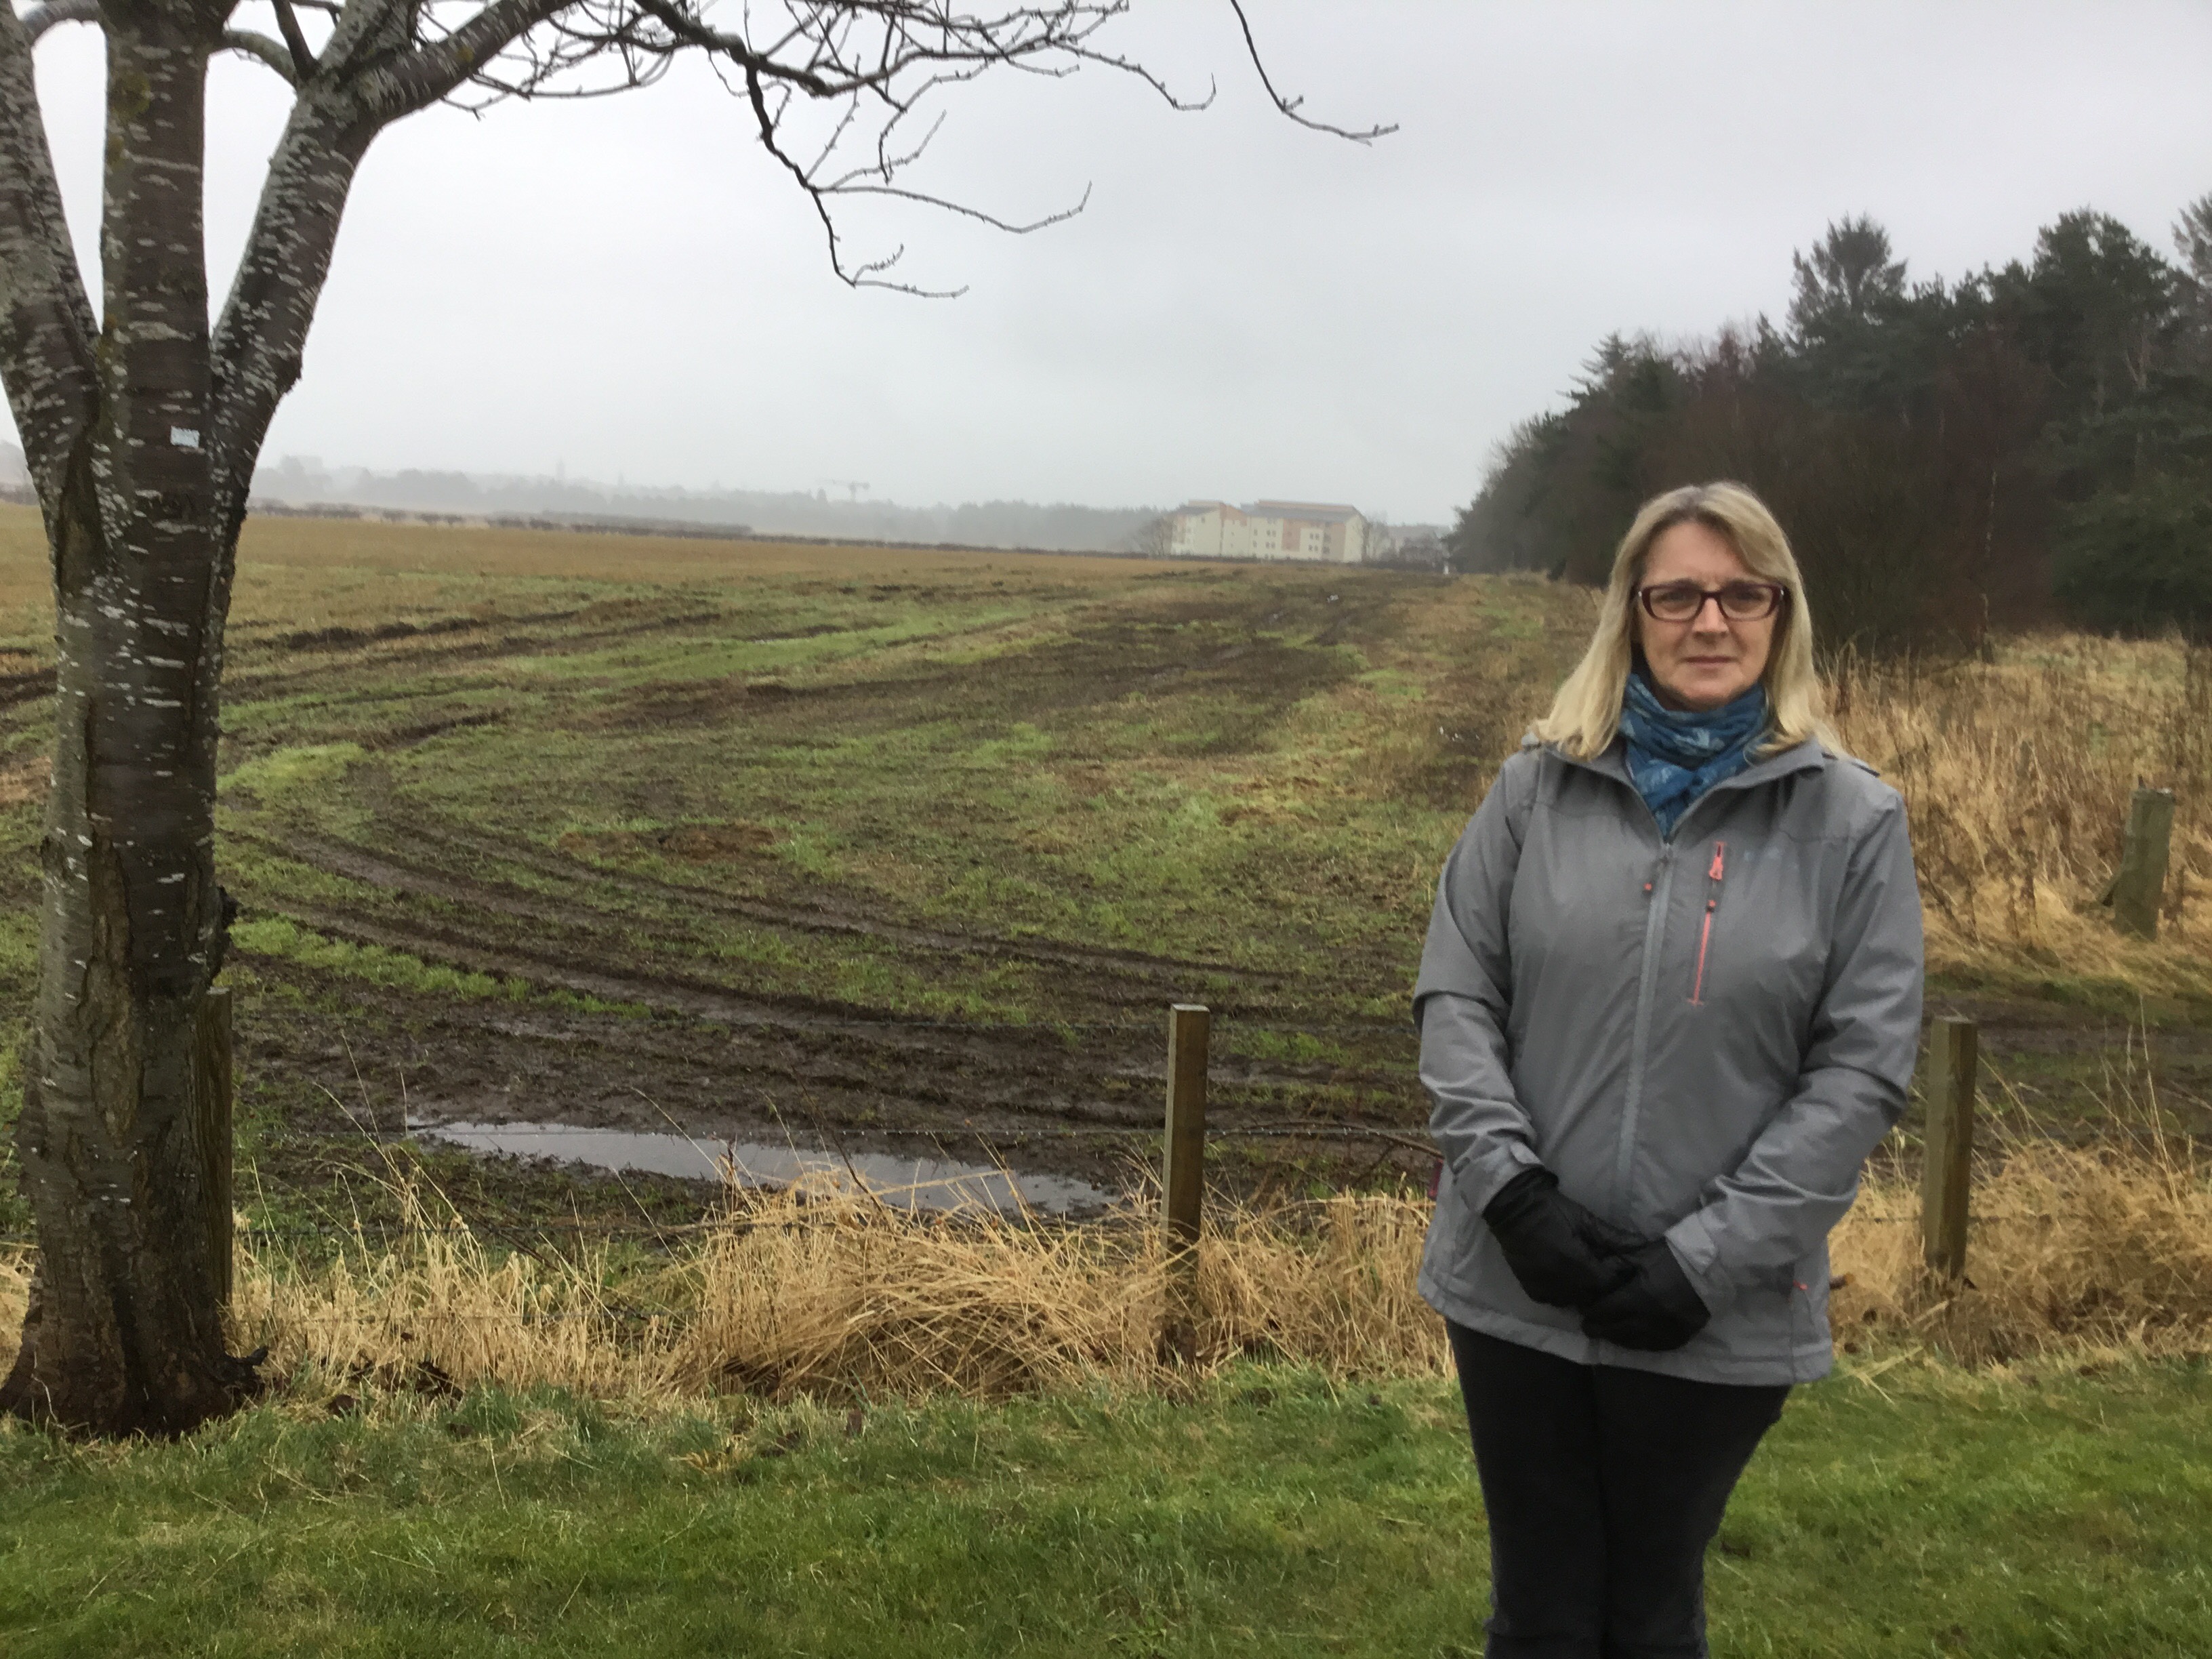 Cllr Ann Verner said work must start at Langlands without delay